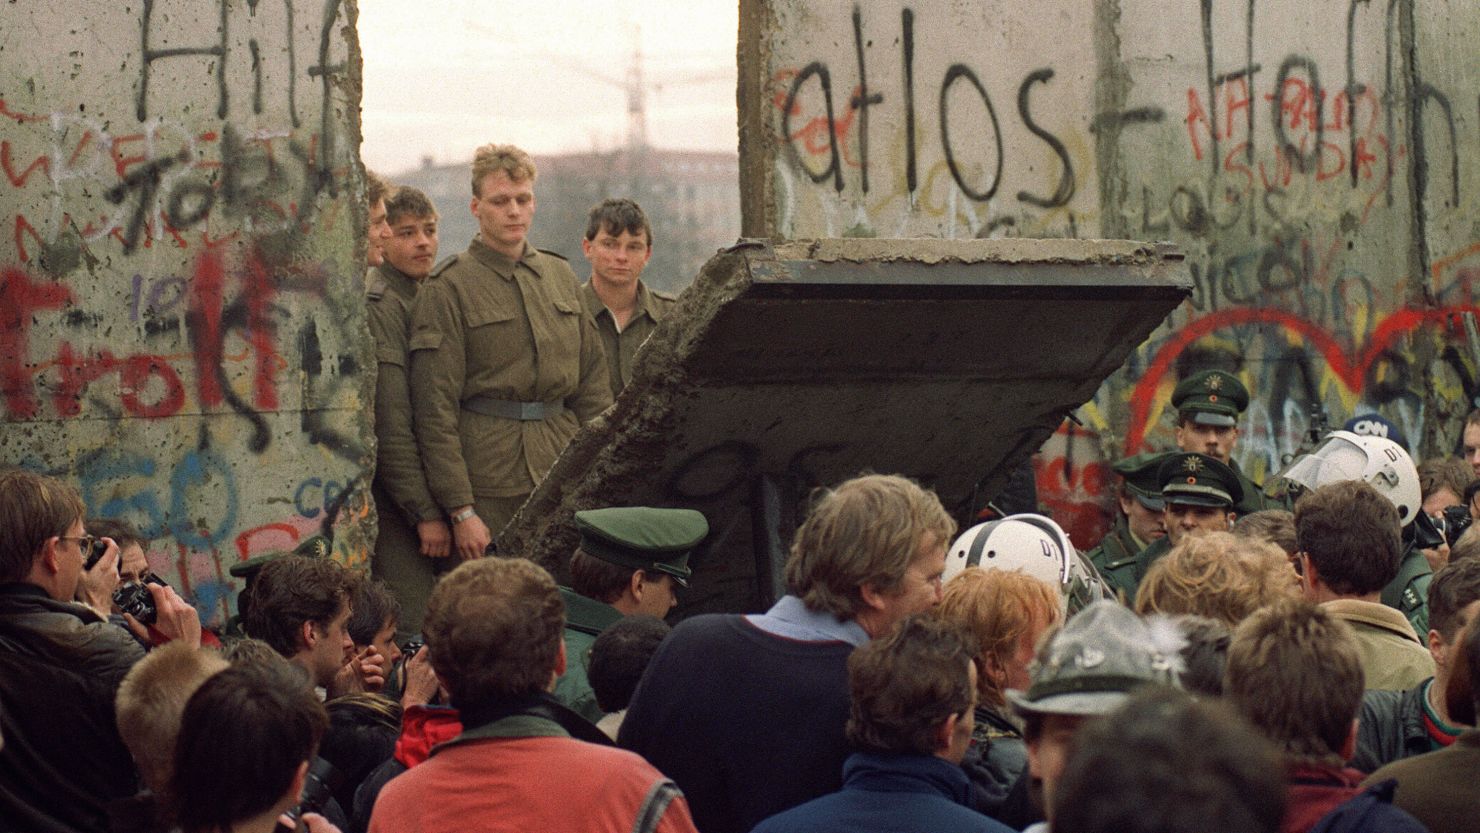 West Berliners at the Berlin Wall on November 11, 1989 watch as East German border guards open a new crossing.